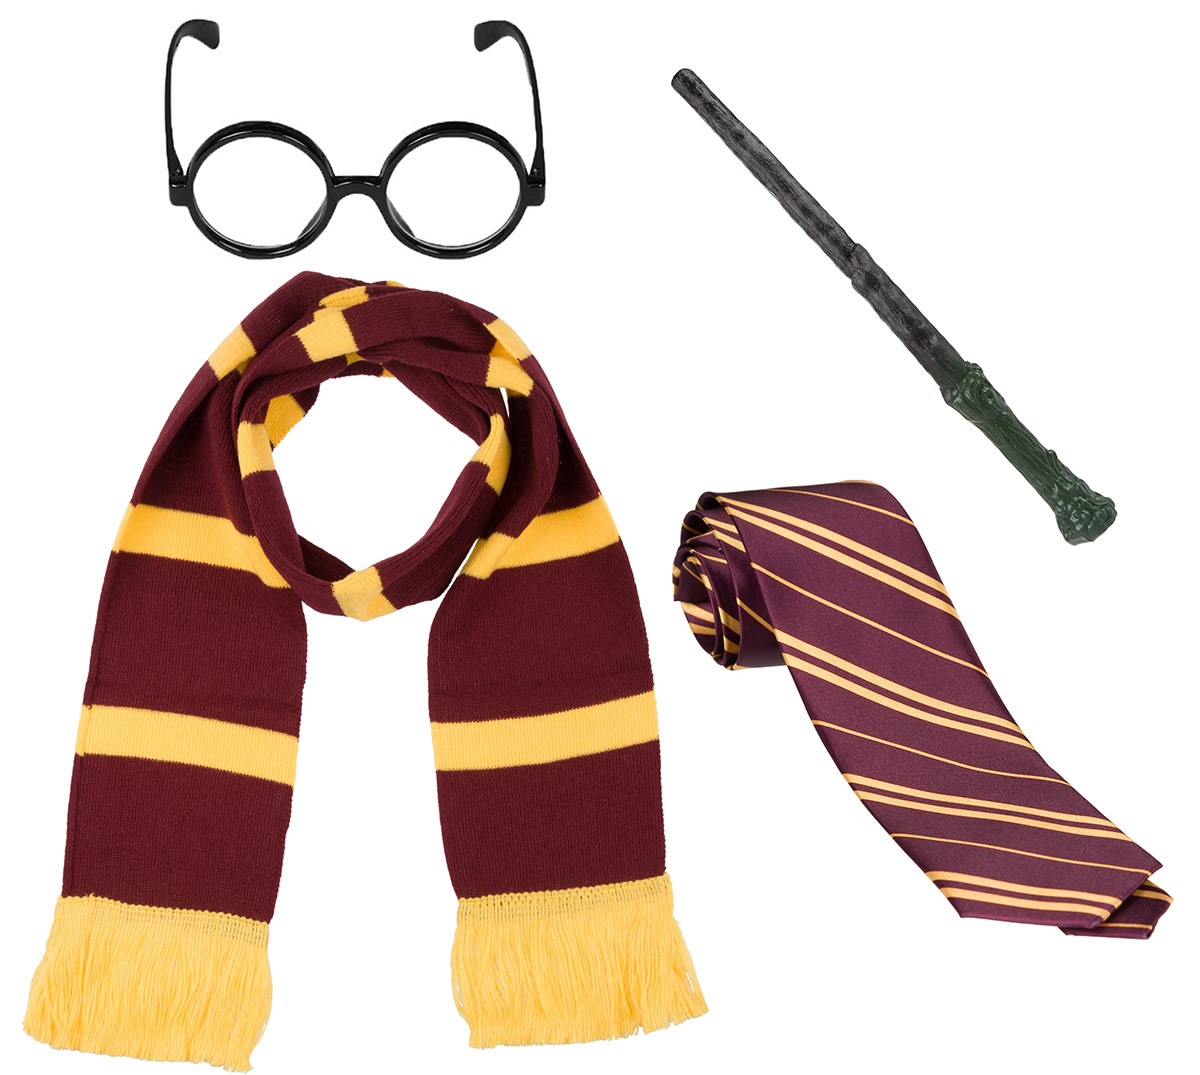 WIZARD POTTER BOOK DAY FANCY DRESS GLASSES WAND TIE CHOICES HARRY WORLD BOOK DAY